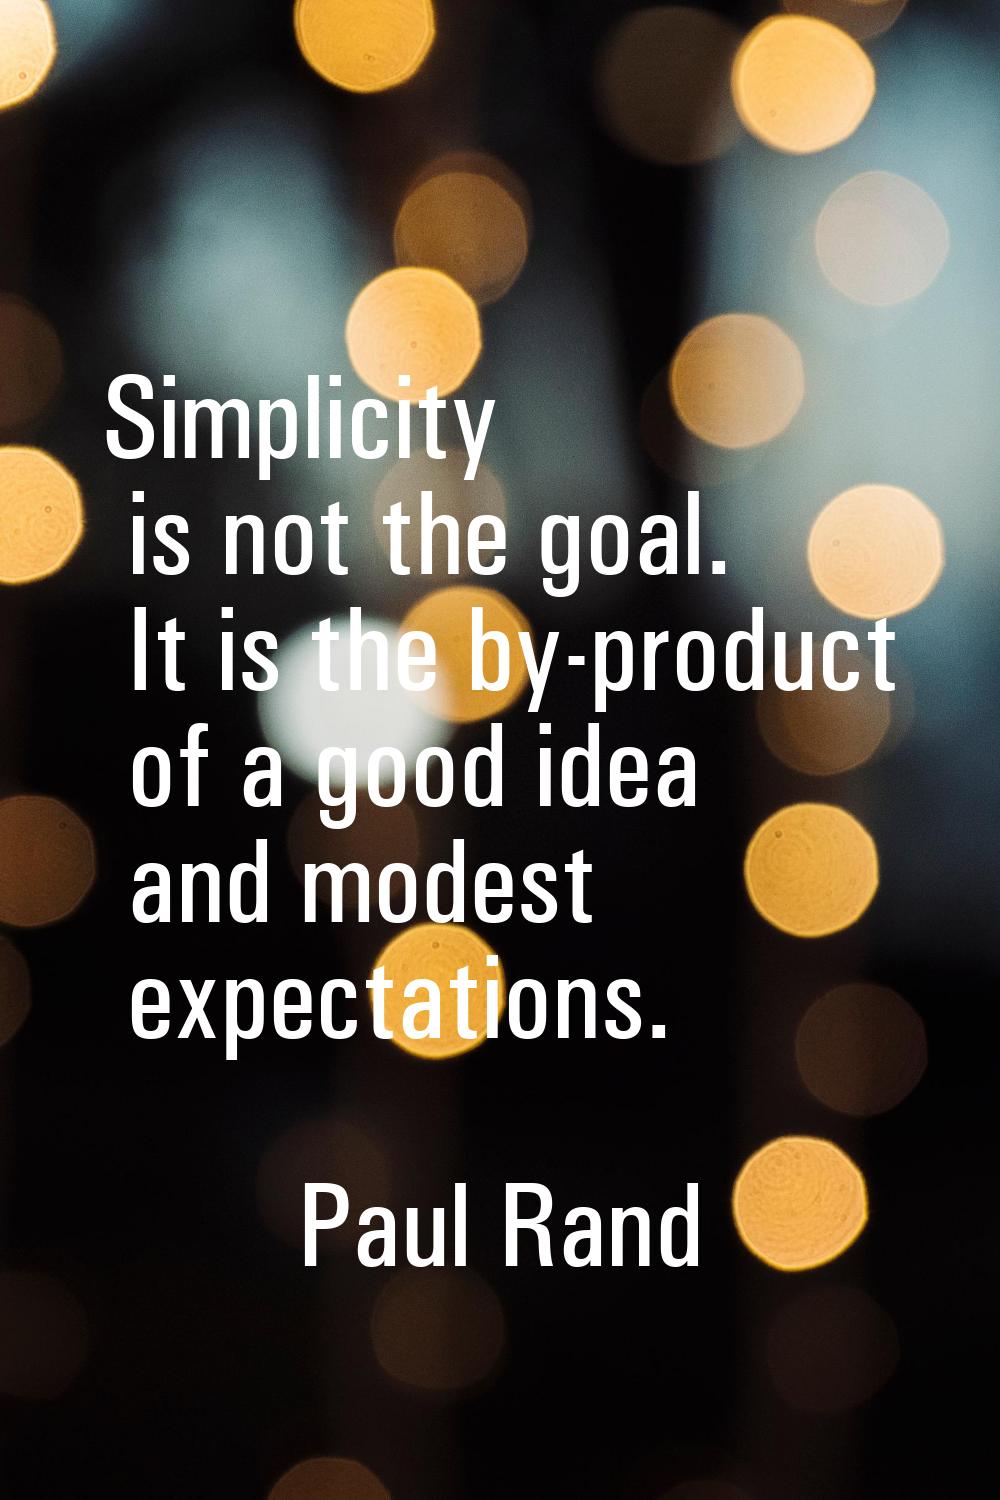 Simplicity is not the goal. It is the by-product of a good idea and modest expectations.